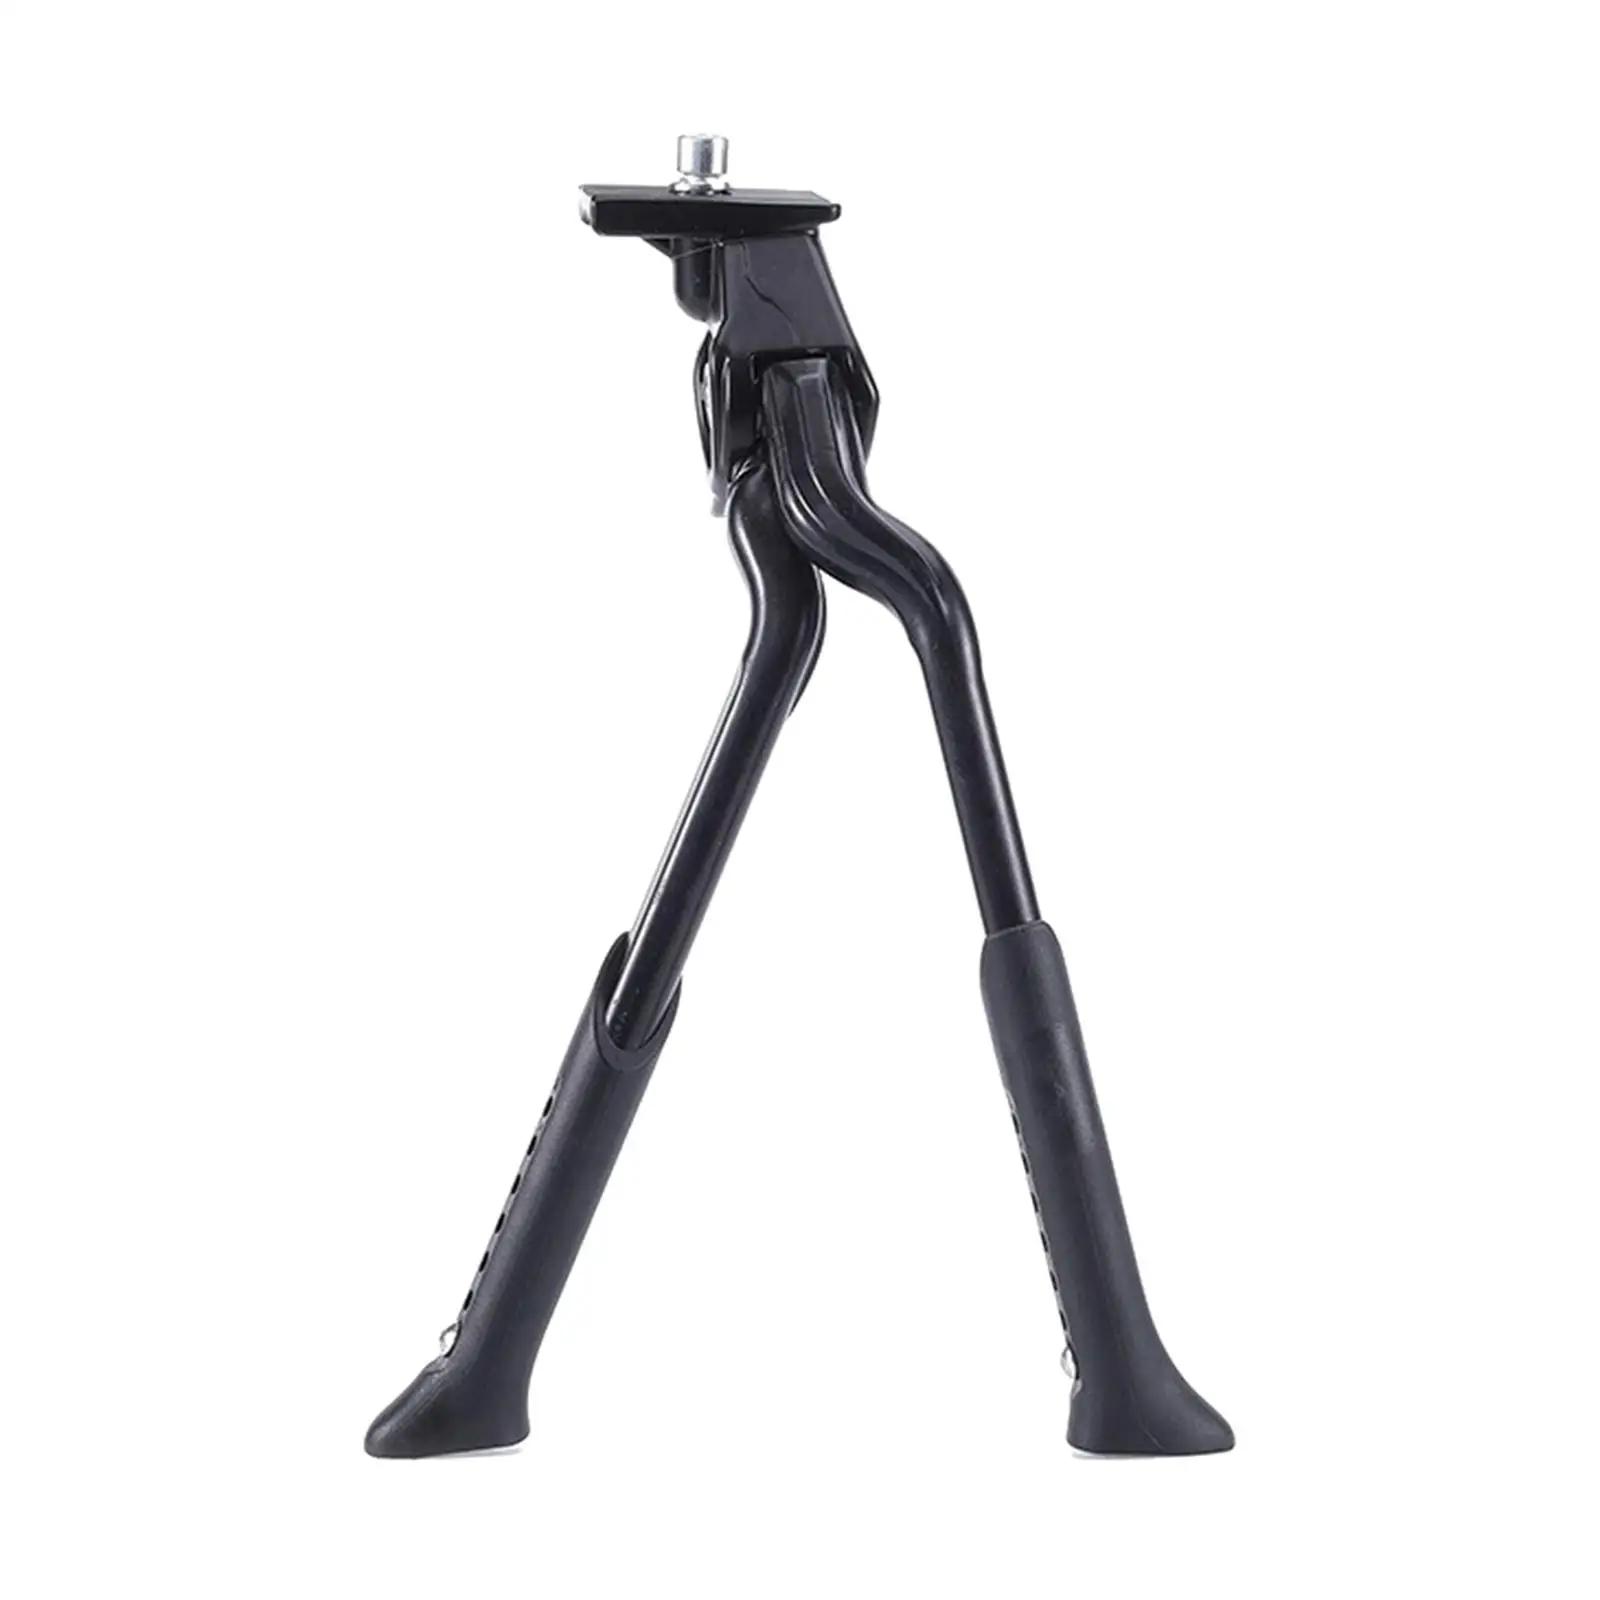 Double Leg Bike Kickstand Dual Leg Bicycle Stand Aluminum Alloy Non Slip Footrest Bicycle Cycling Parking Side Stand